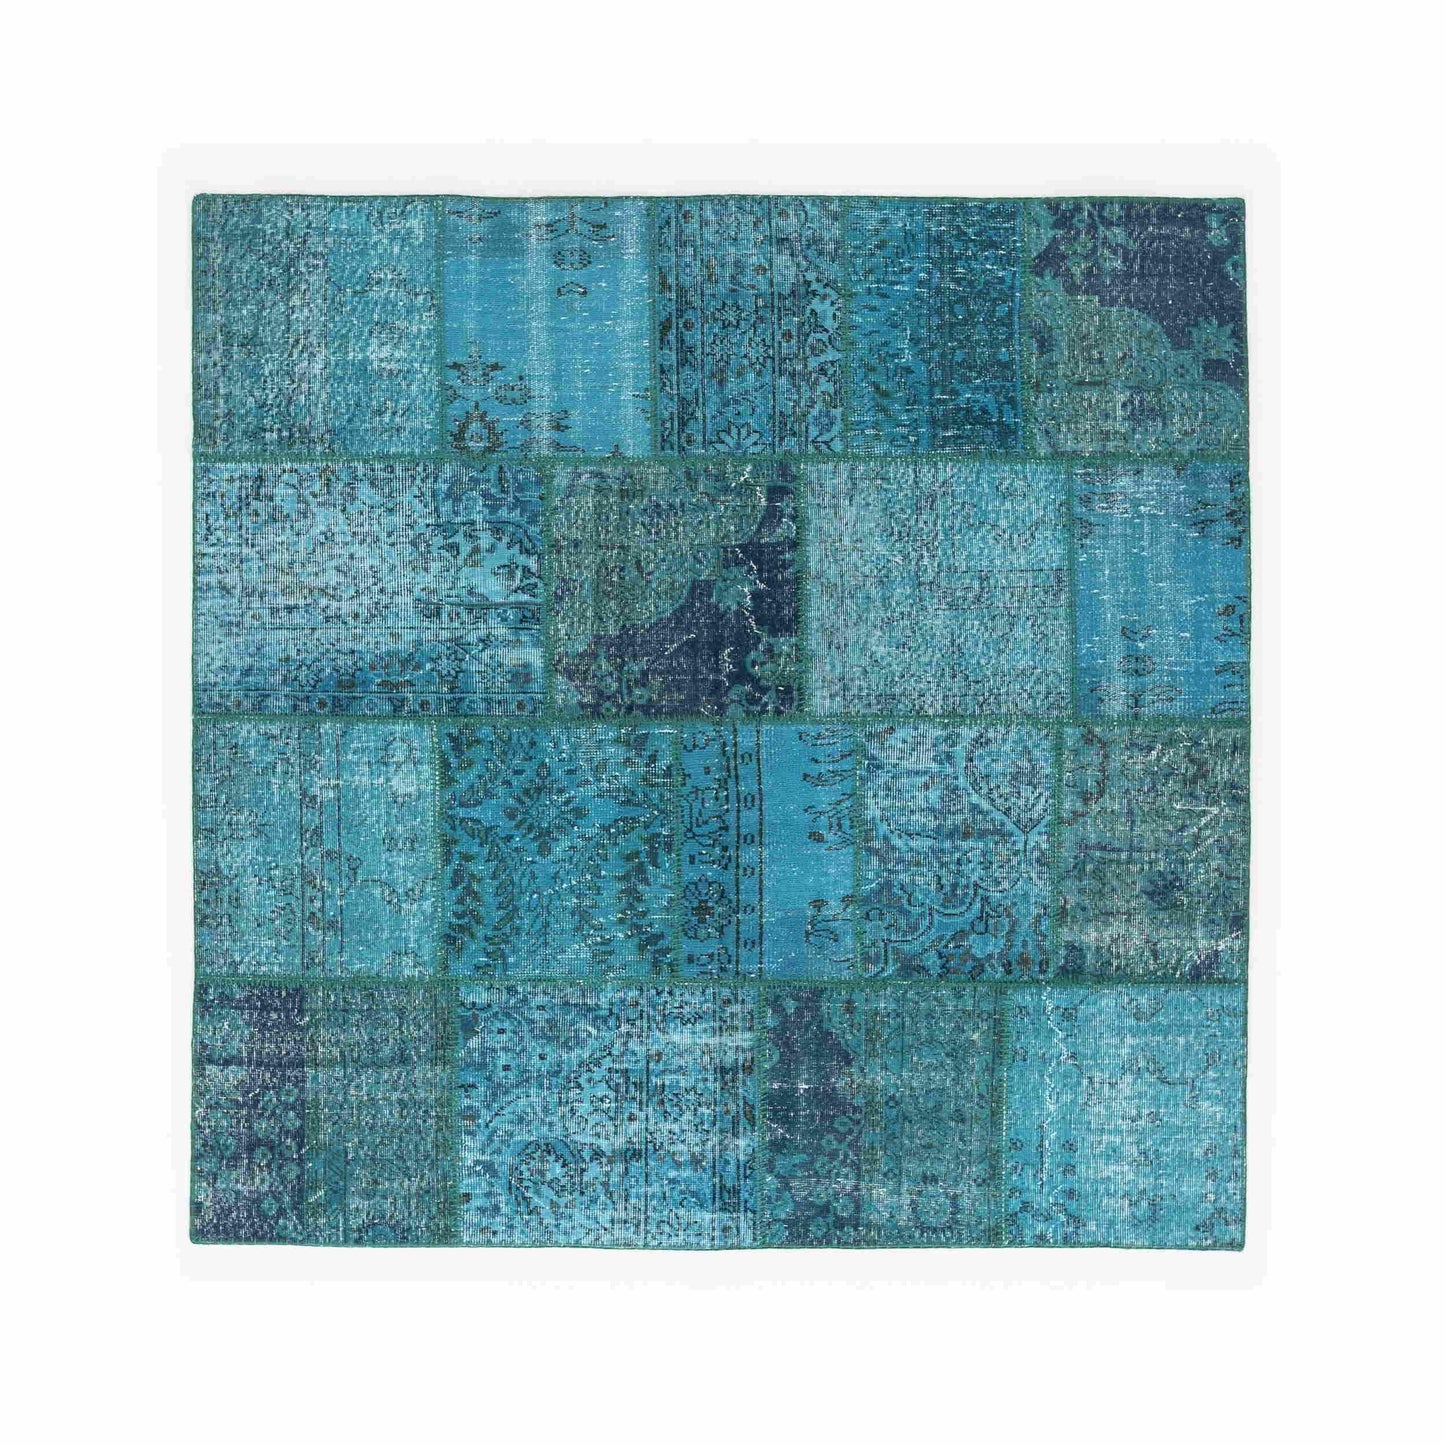 Oriental Rug Patchwork Hand Knotted Wool On Wool 200 x 200 Cm - 6' 7'' x 6' 7'' Turquoise C019 ER12